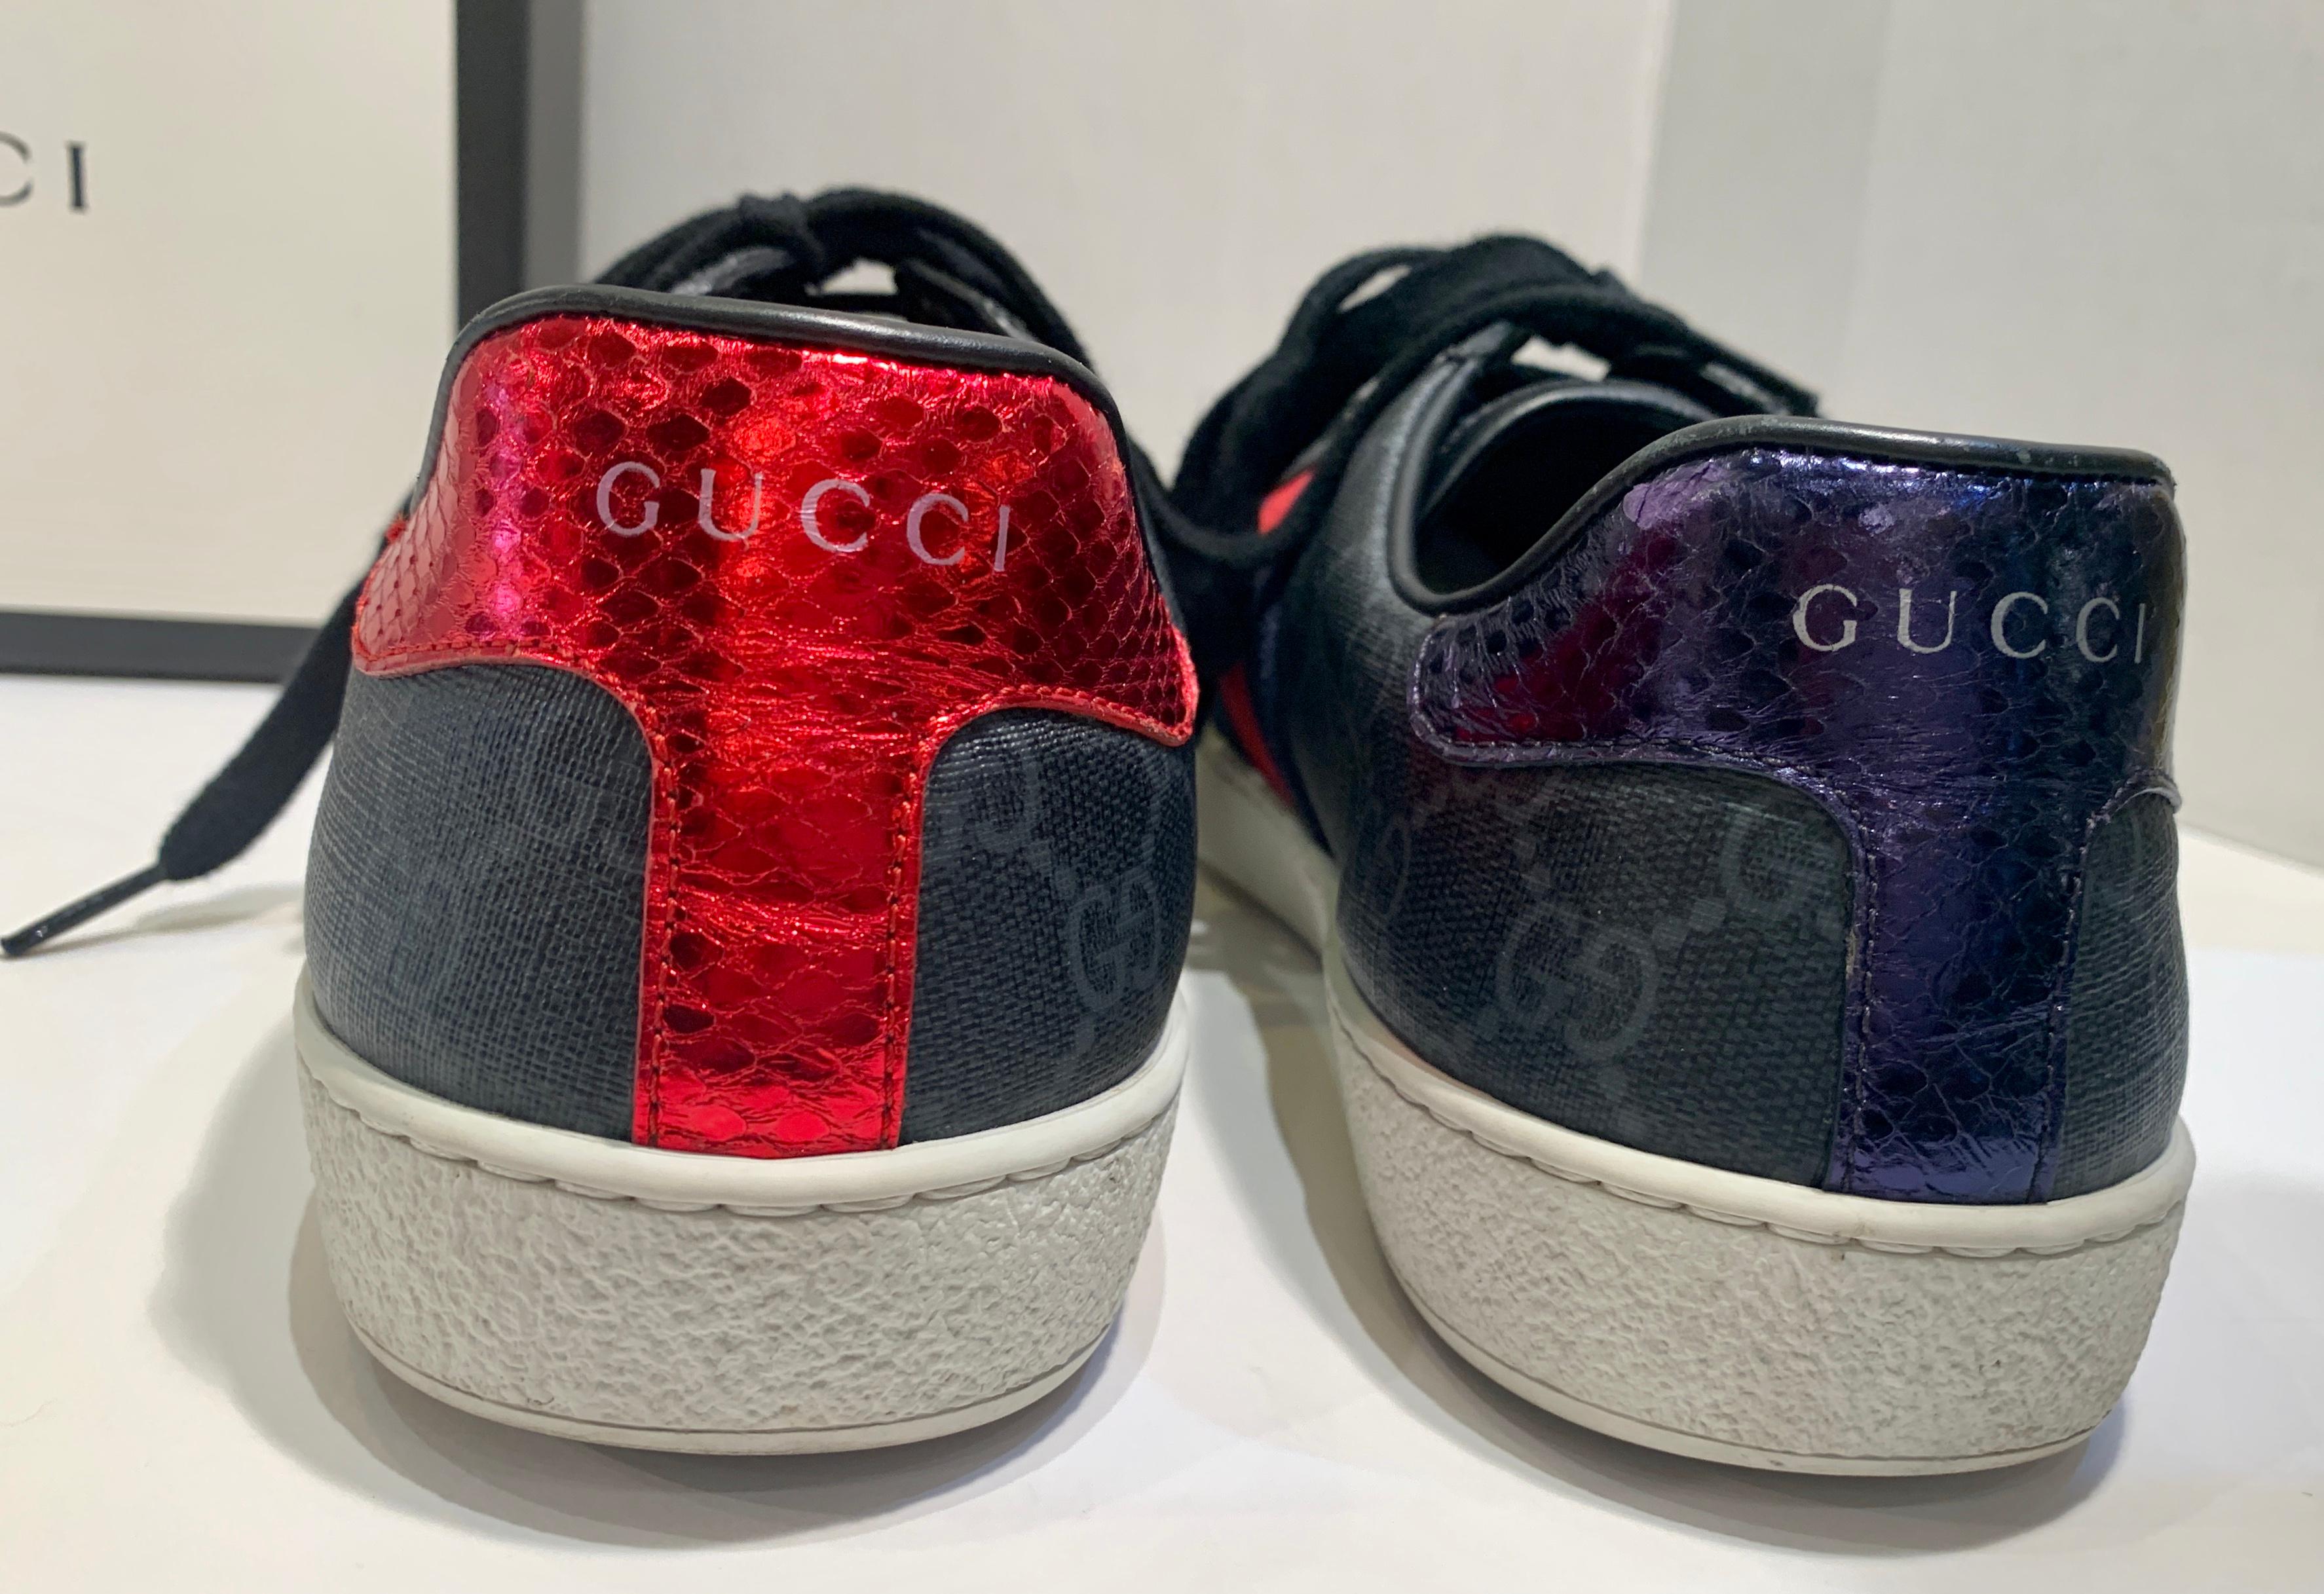 Black Stylish Retro GUCCI Ace GG Supreme Unisex Sneakers Size 7 Mens or Size 9 Womens